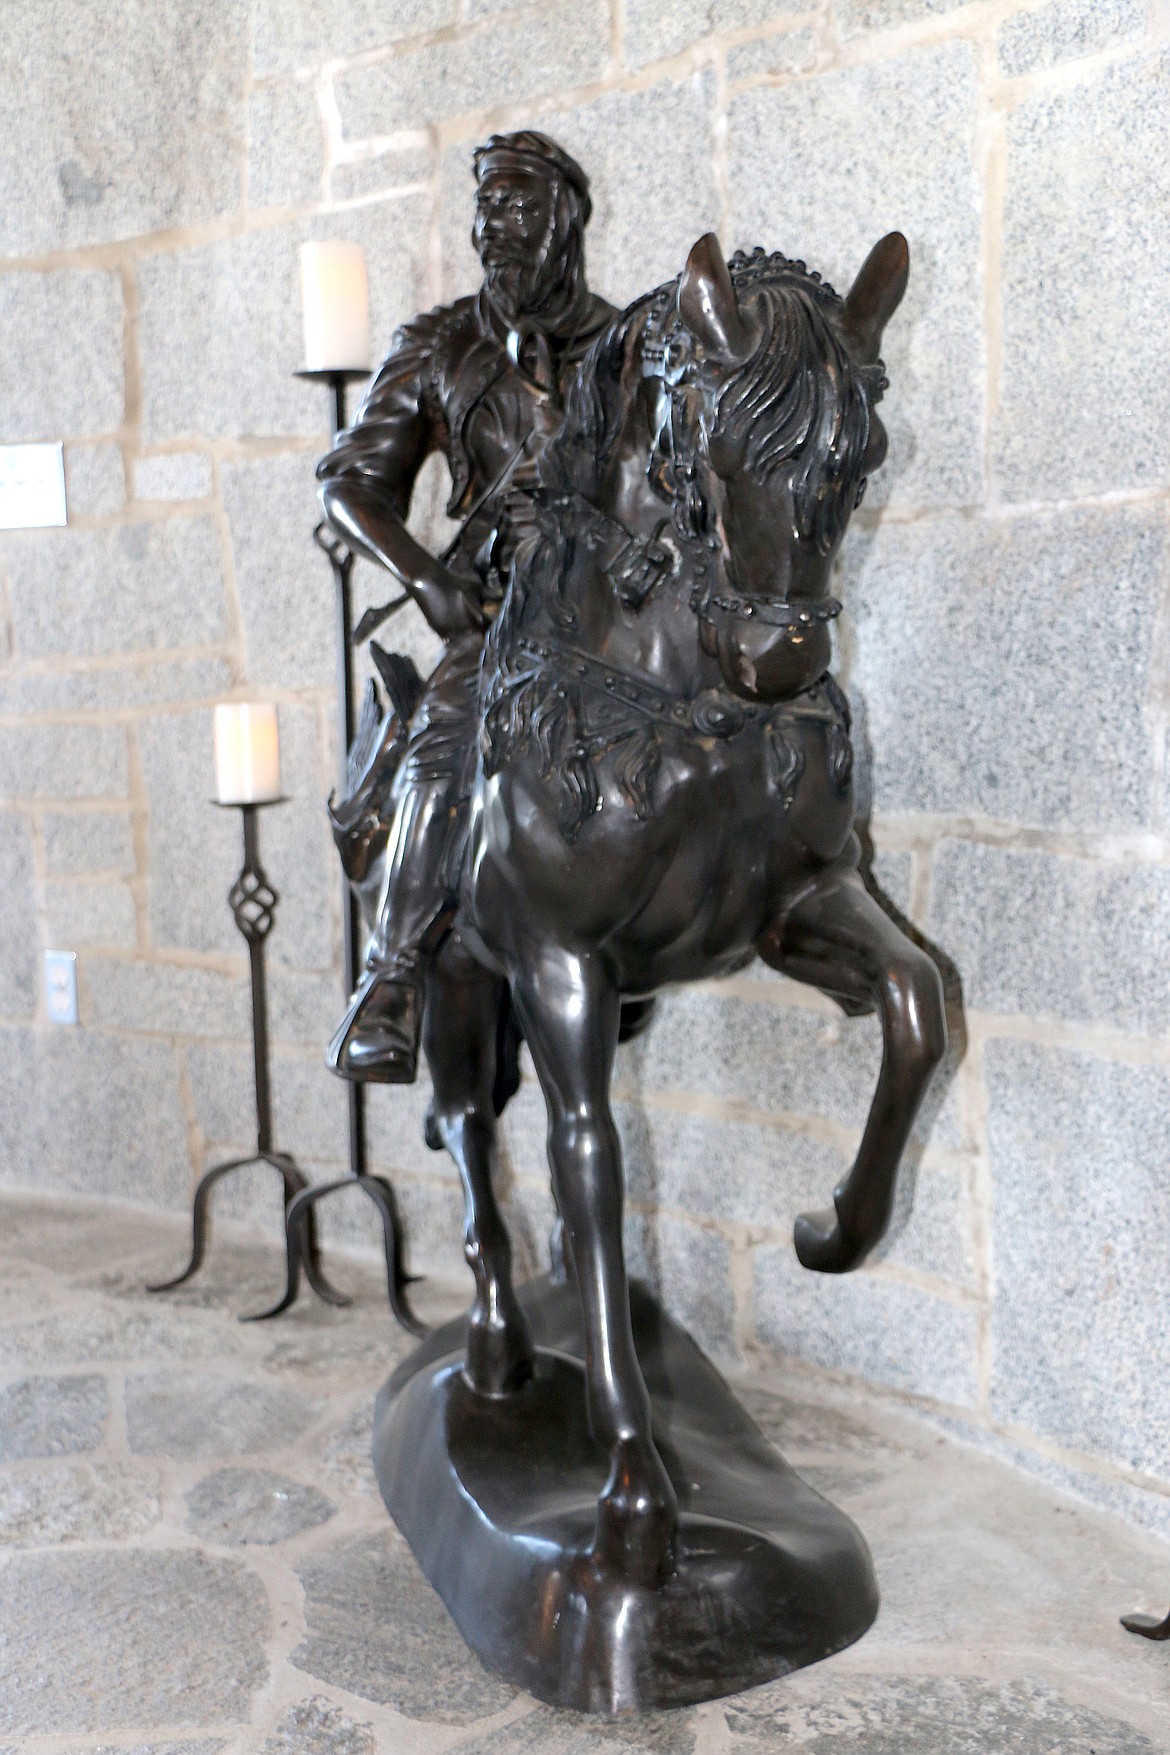 A statue of a knight on horseback adds ambience at Castle Von Frandsen.